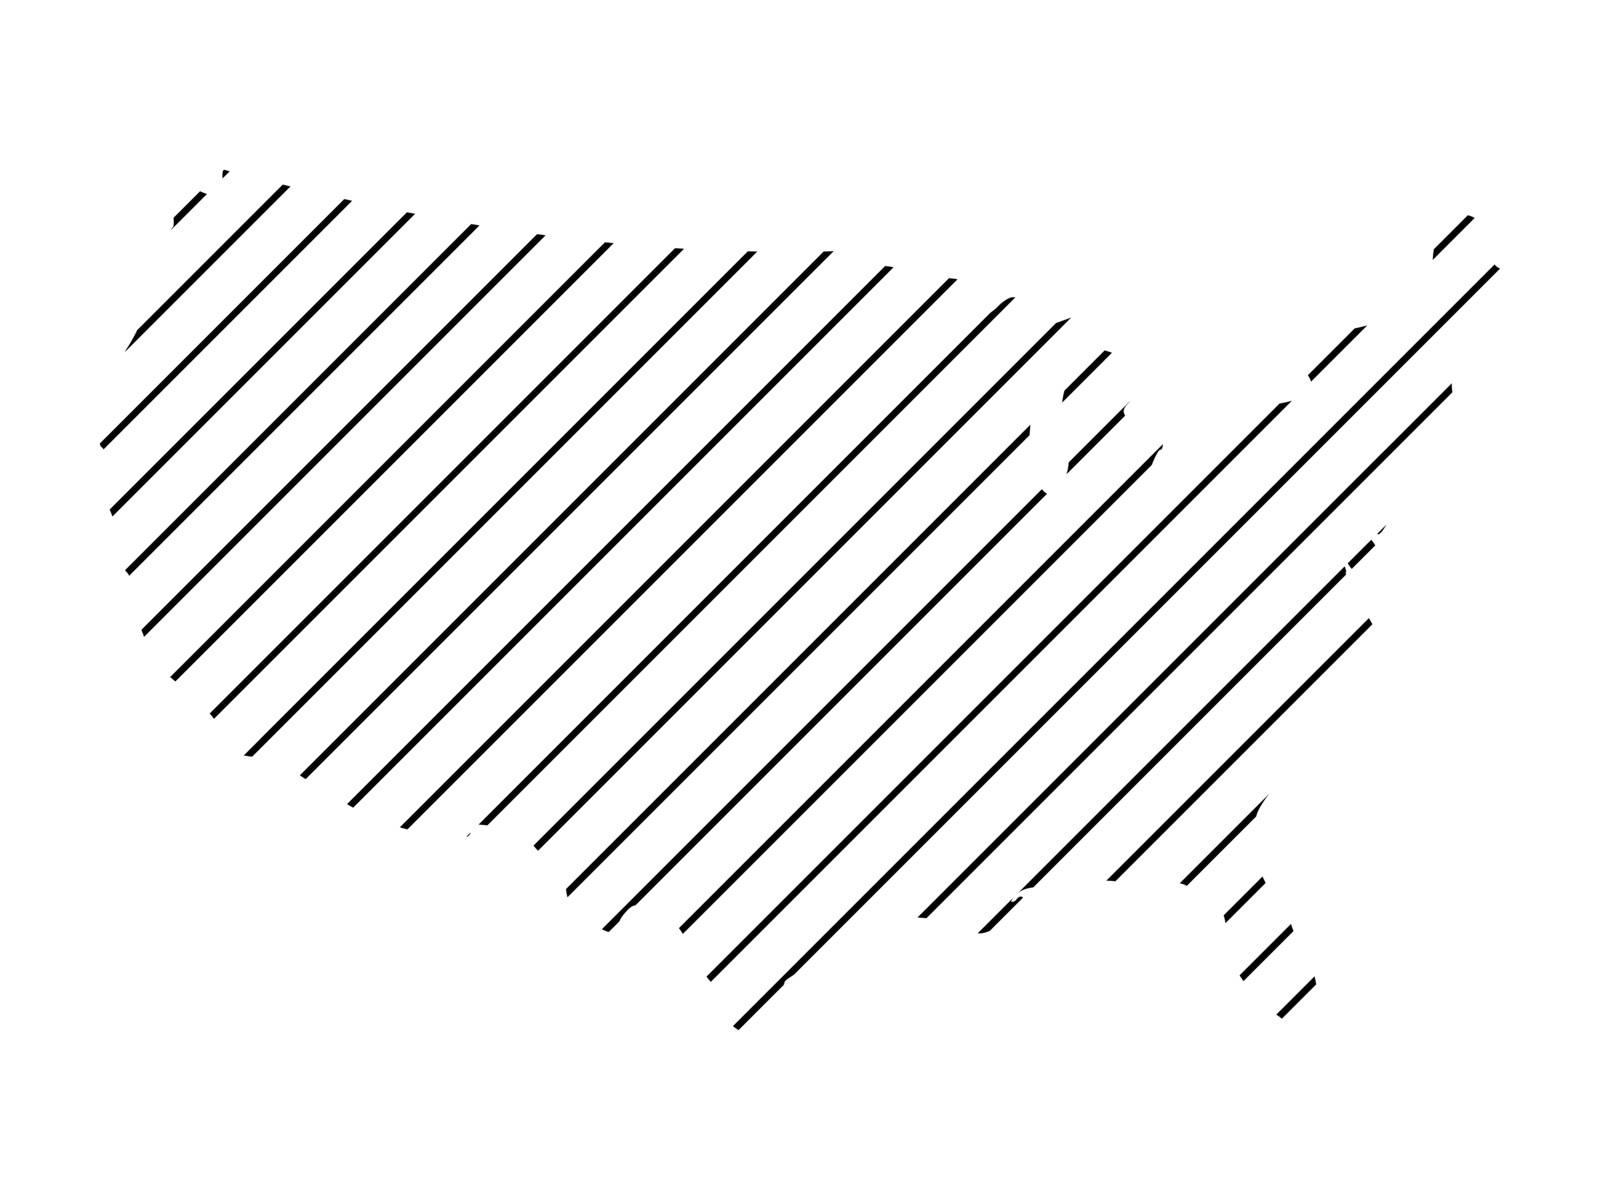 Striped map of United States of America. USA map made of thin black lines on white background.